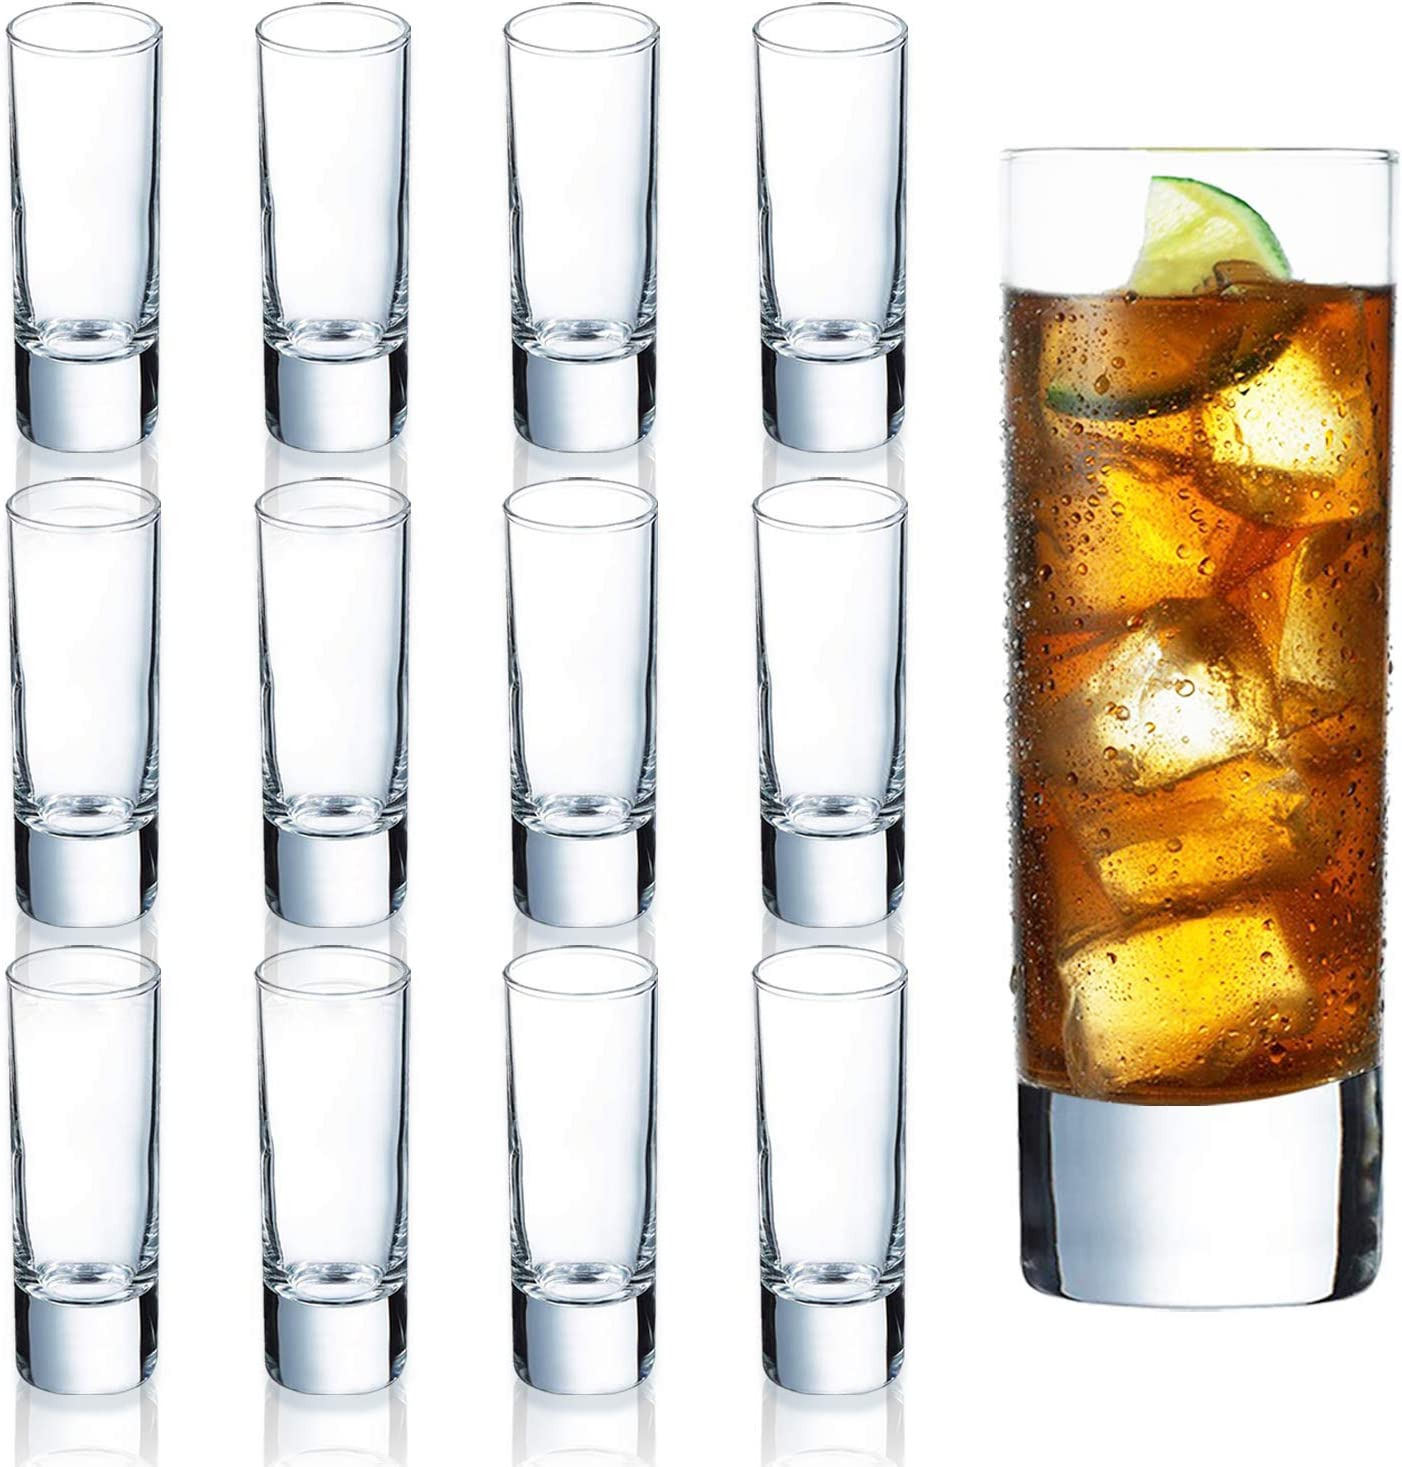 Clear Heavy Base Shot Glasses 12 Pack, 2 Oz Tall Glass Set for Whiskey, Tequila,